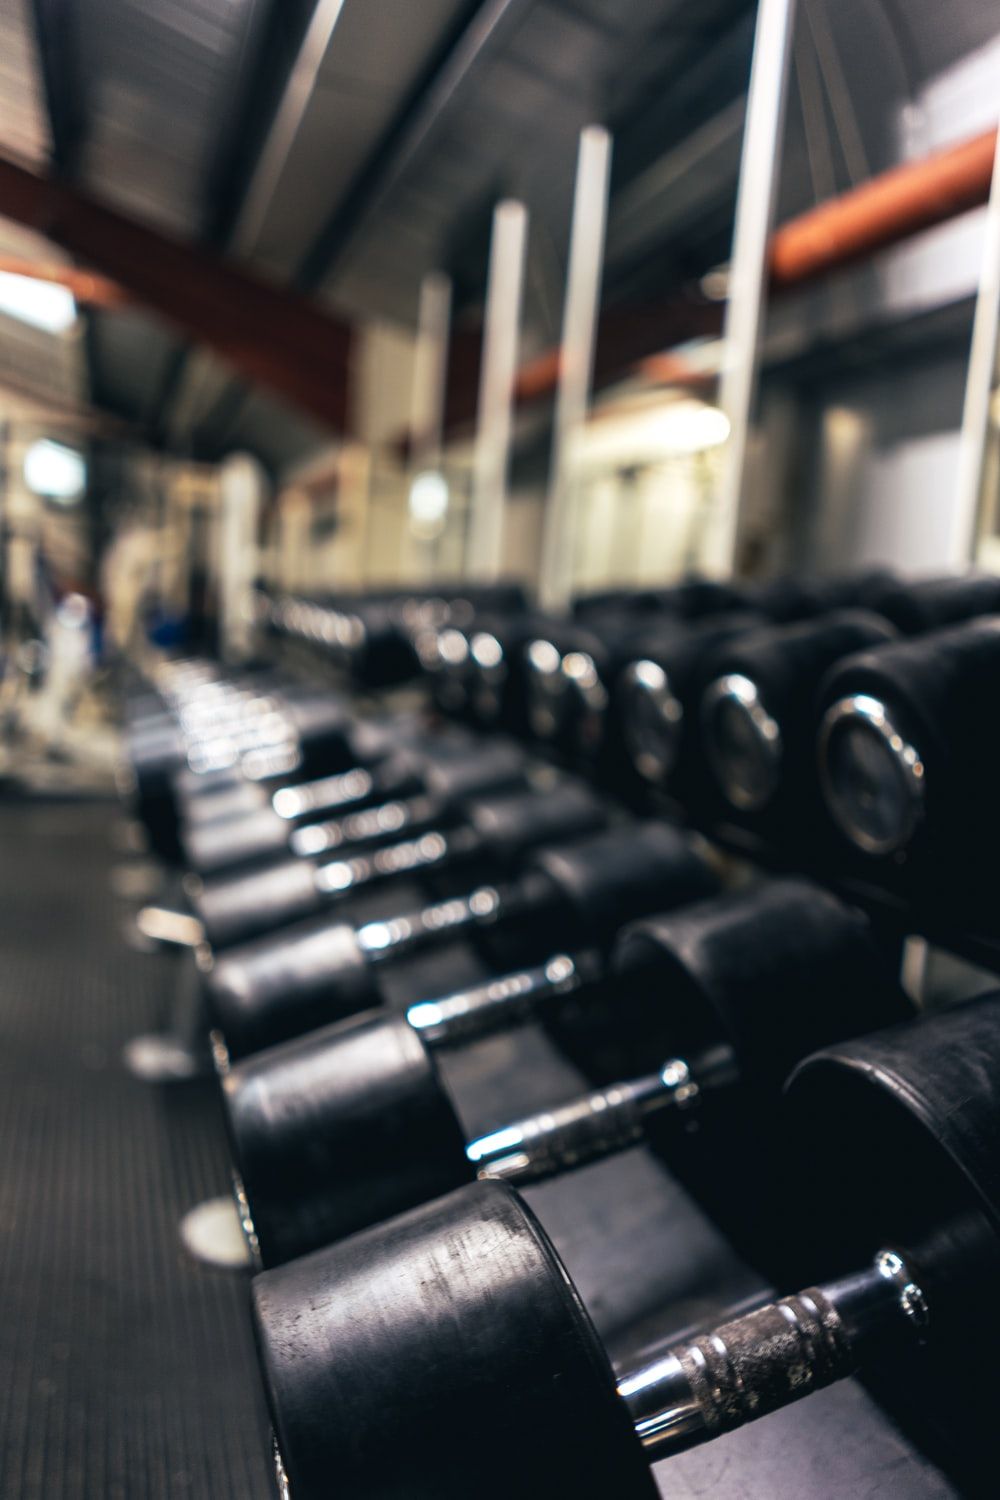 Gym Equipment Picture. Download Free Image